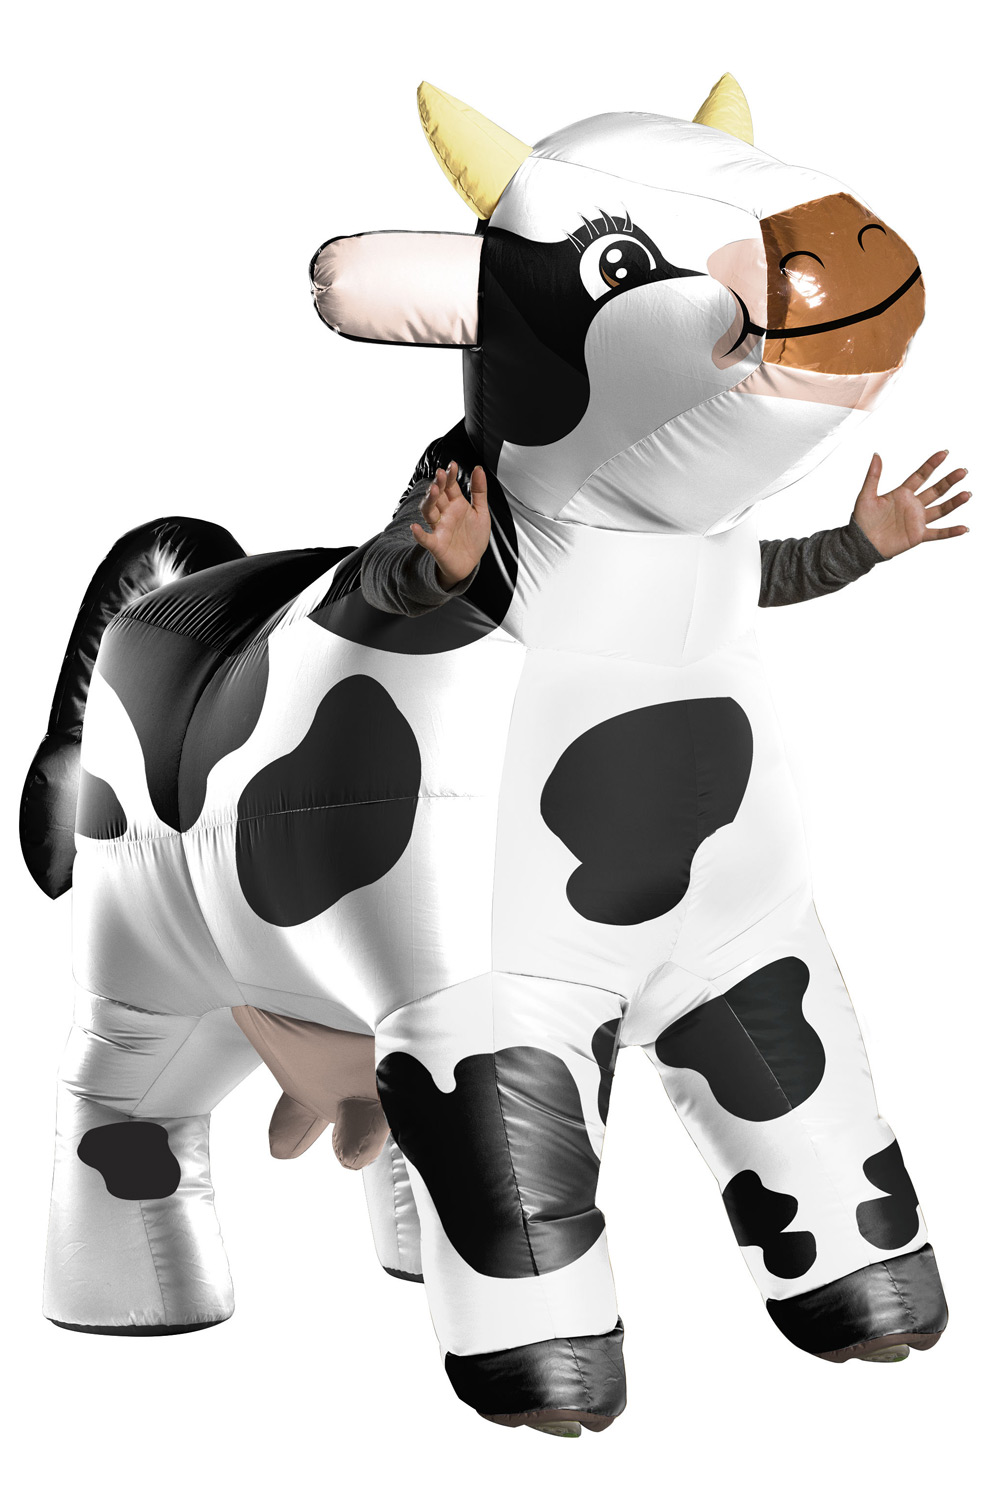 Check out the deal on Moo Moo the Cow Inflatable Adult Costume at PureCostu...